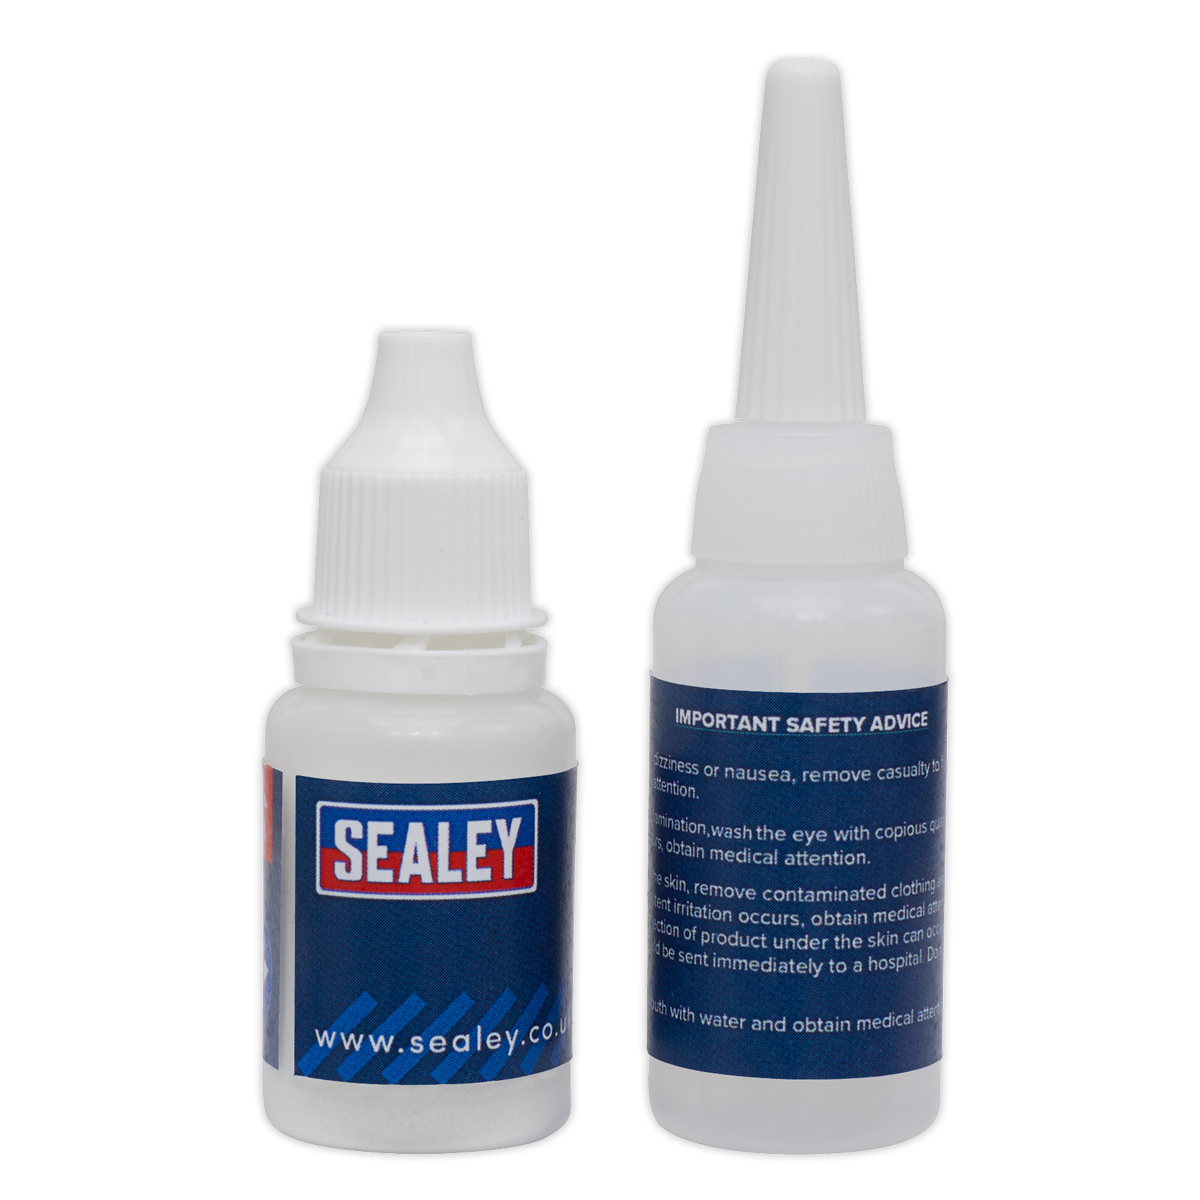 Fast-Fix Filler & Adhesive - Clear - SCS906 - Farming Parts